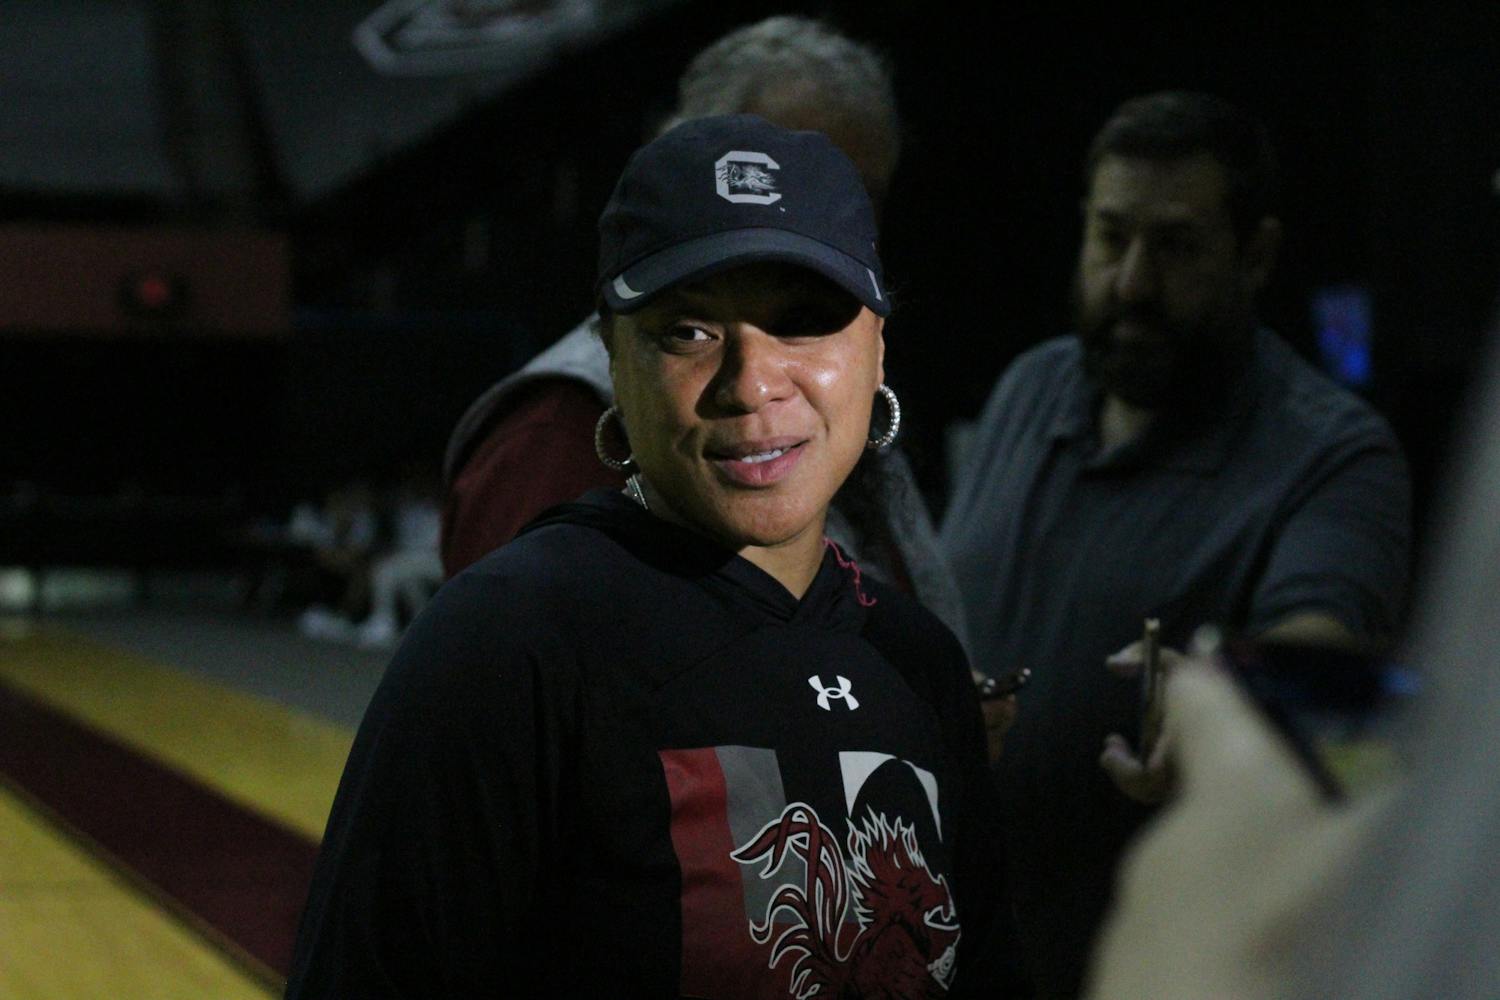 Dawn Staley, head coach of the South Carolina's women’s basketball team, talks with reporters after the first official practice of the 鶹С򽴫ý on Sept. 28, 2023. She said she is optimistic and confident in her team’s abilities to have a successful upcoming 鶹С򽴫ý.